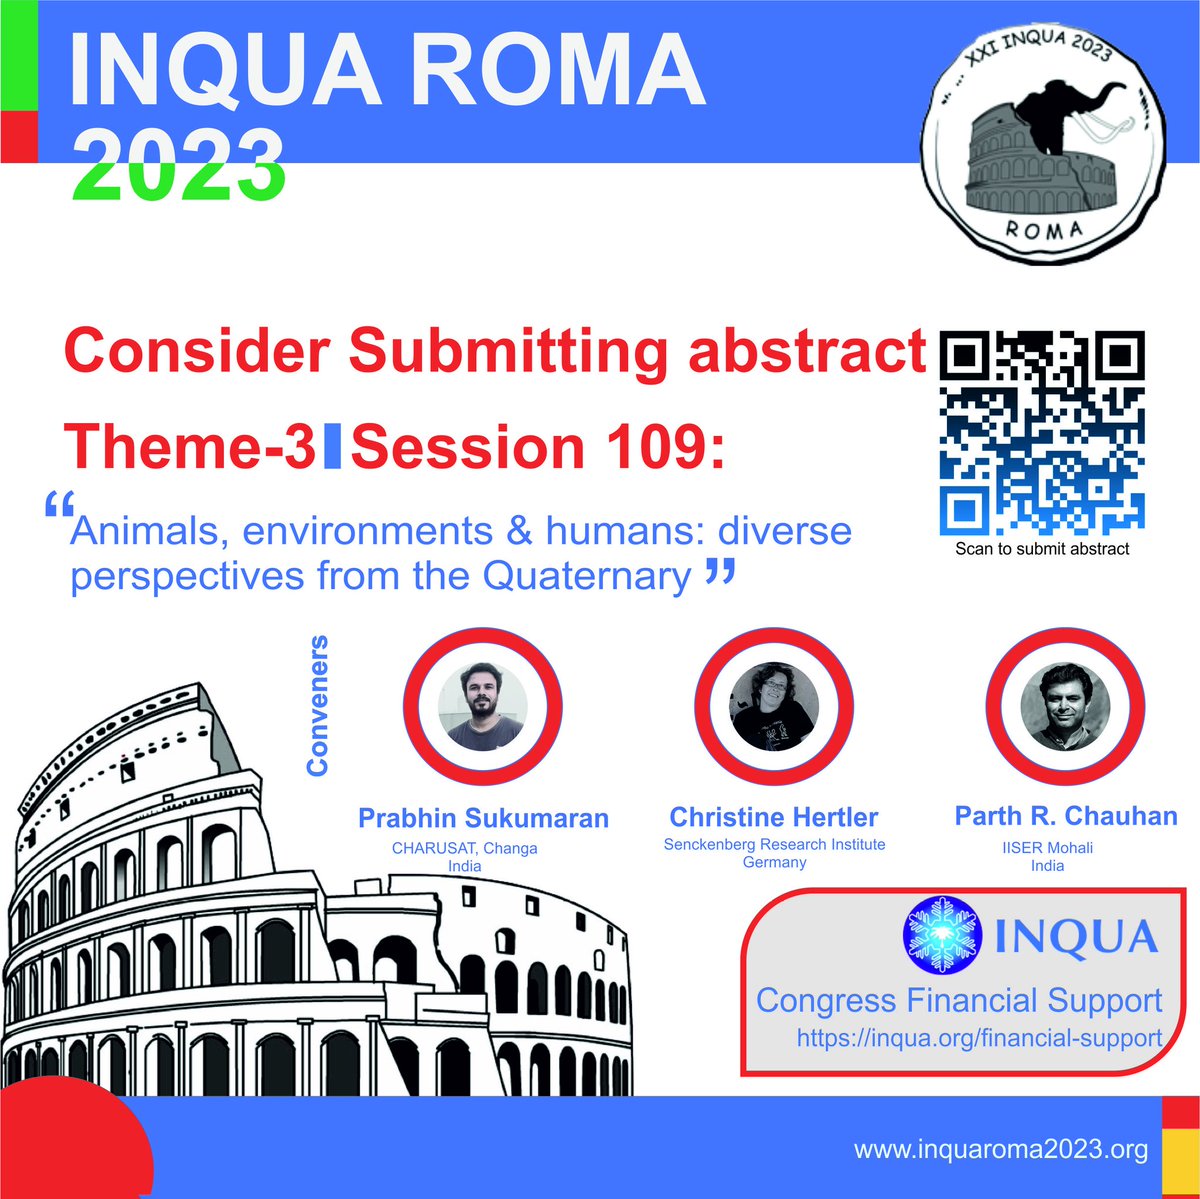 1st November is last date for abstract submission. Don't miss opportunity @InquaRoma2023 @AOQRIndia @INQUA @INQUA_ECR @INQUAsaccom #quaternary #climatechange